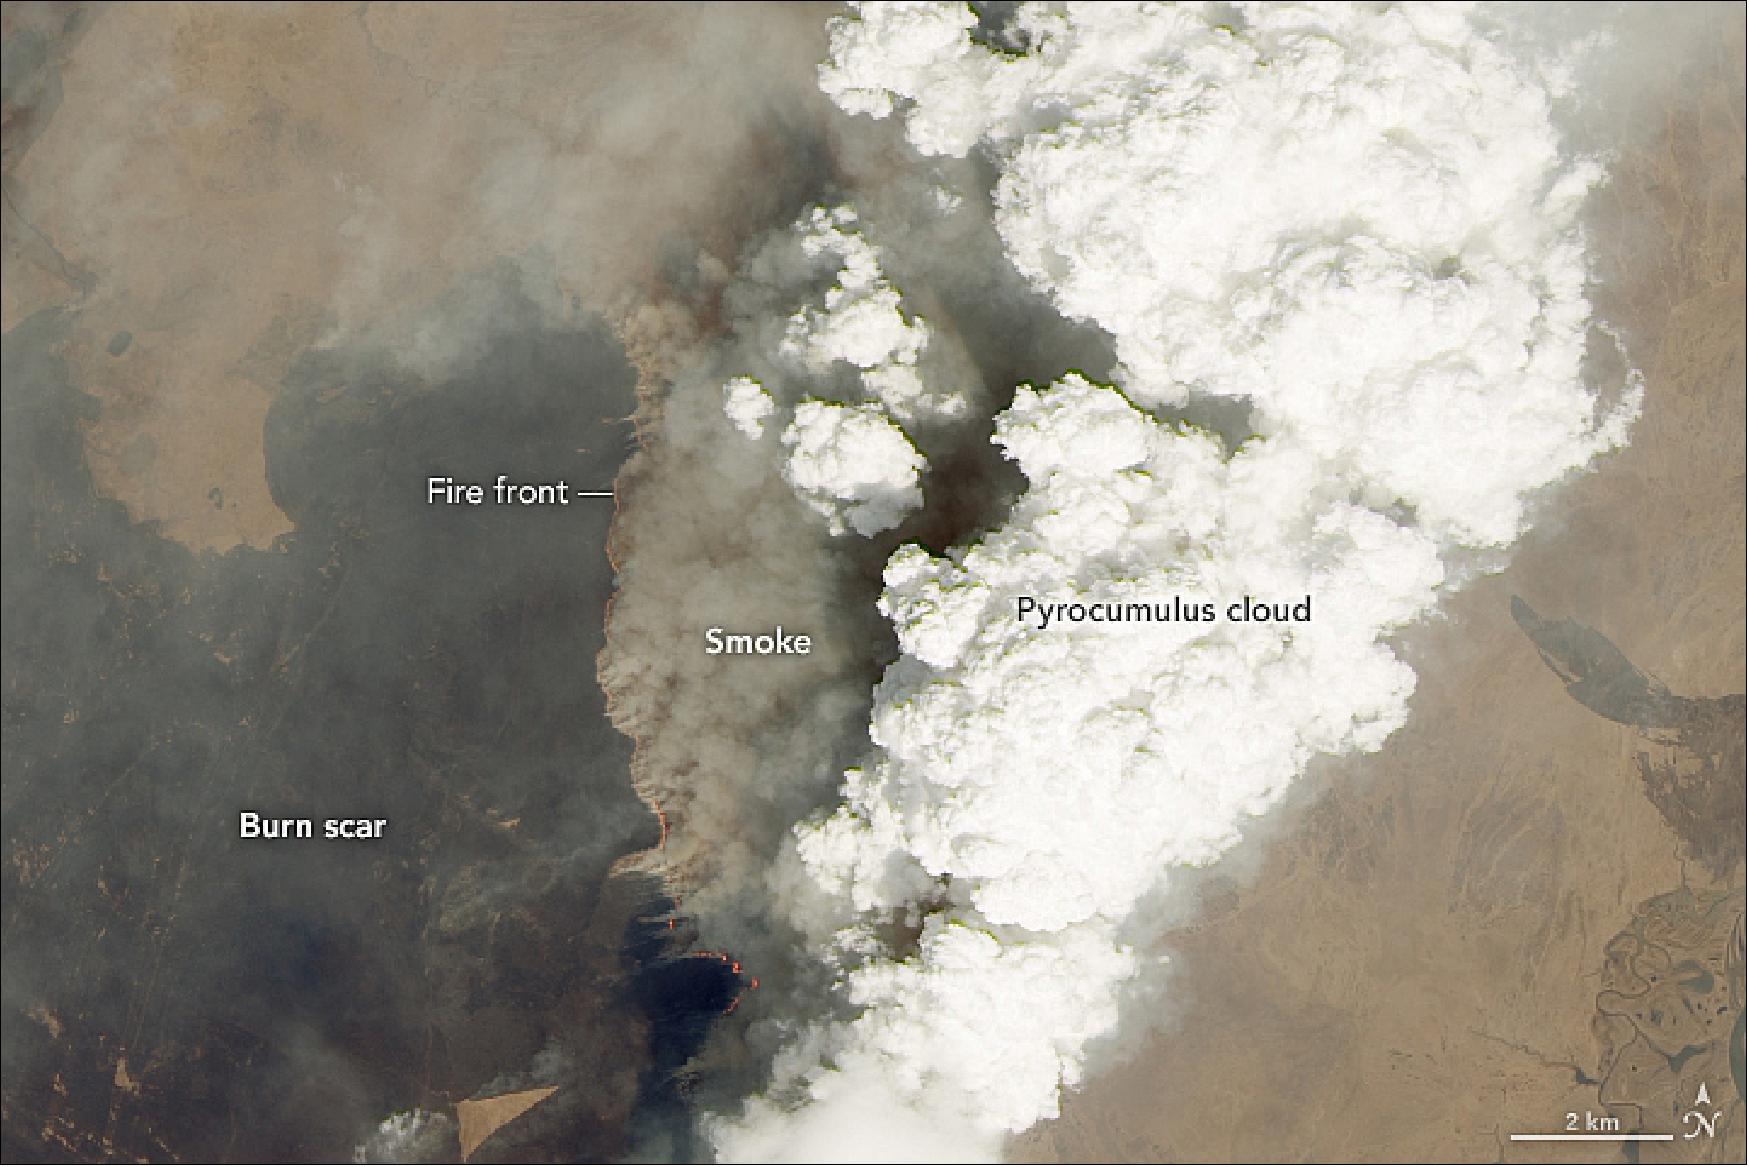 Figure 37: The fire near Naykhin on 30 April 2019 caught the attention of atmospheric scientists for producing what was likely the first pyrocumulus of the year in the Northern Hemisphere. Pyrocumulus clouds—sometimes called “fire clouds”—are tall, cauliflower-shaped, and appear as opaque white patches bubbling up from darker smoke in satellite images. Fires that produce pyrocumulus clouds tend to spread smoke much higher and farther than those that do not (image credit: NASA Earth Observatory image by Lauren Dauphin, using MODIS data from NASA EOSDIS/LANCE and GIBS/Worldview and using Landsat data from the U.S. Geological Survey. Story by Adam Voiland)